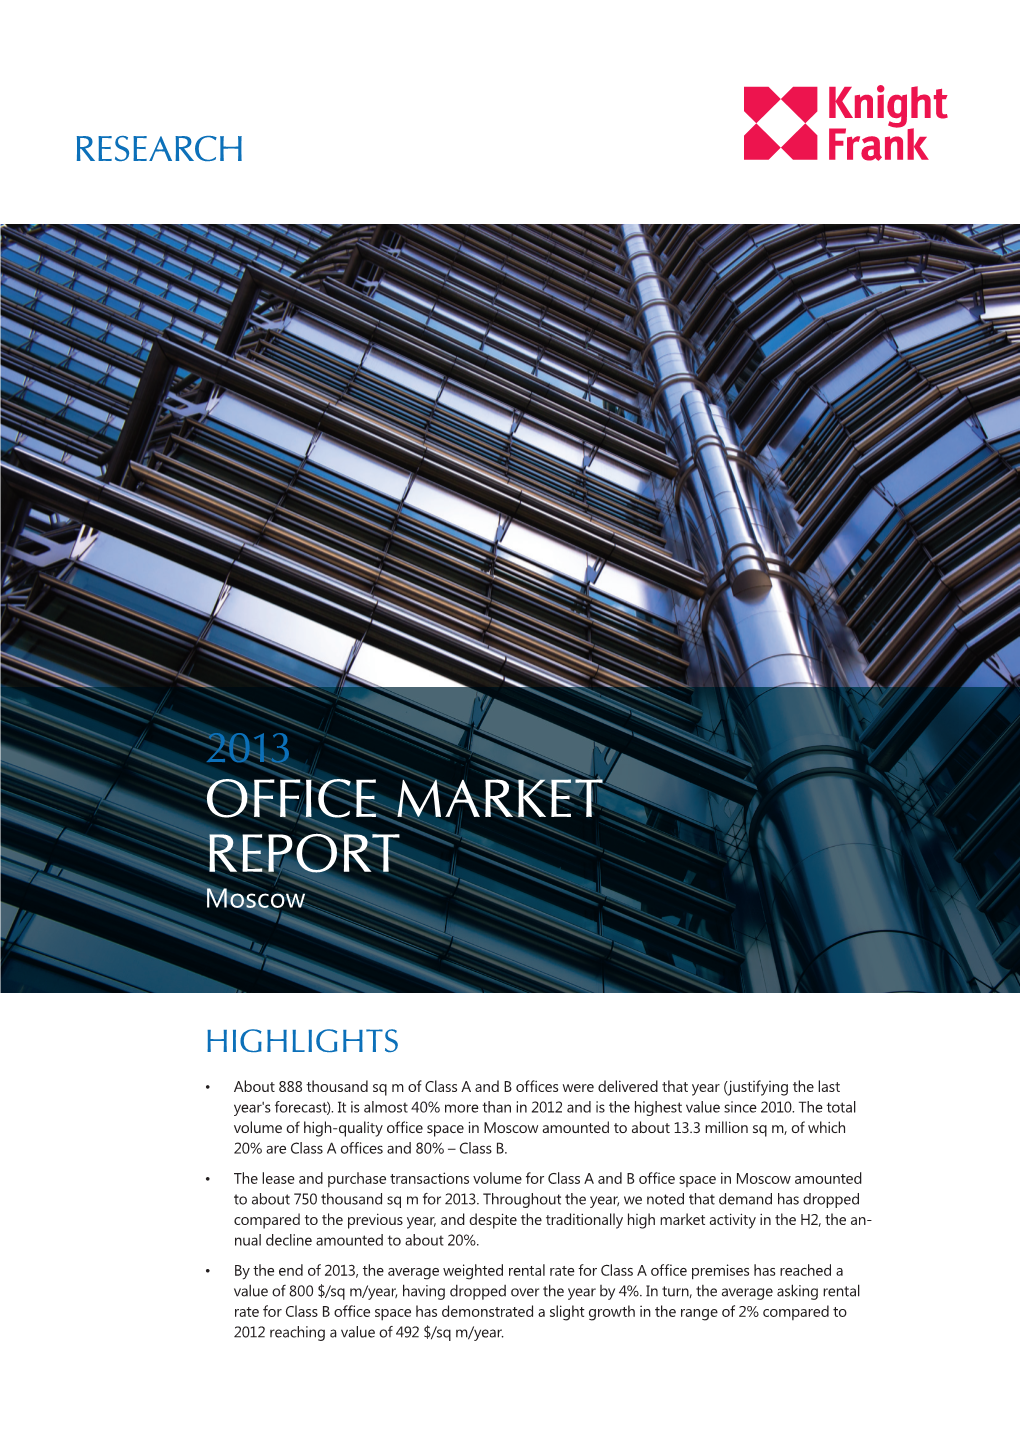 Office Market Report 2013 ENG.Indd